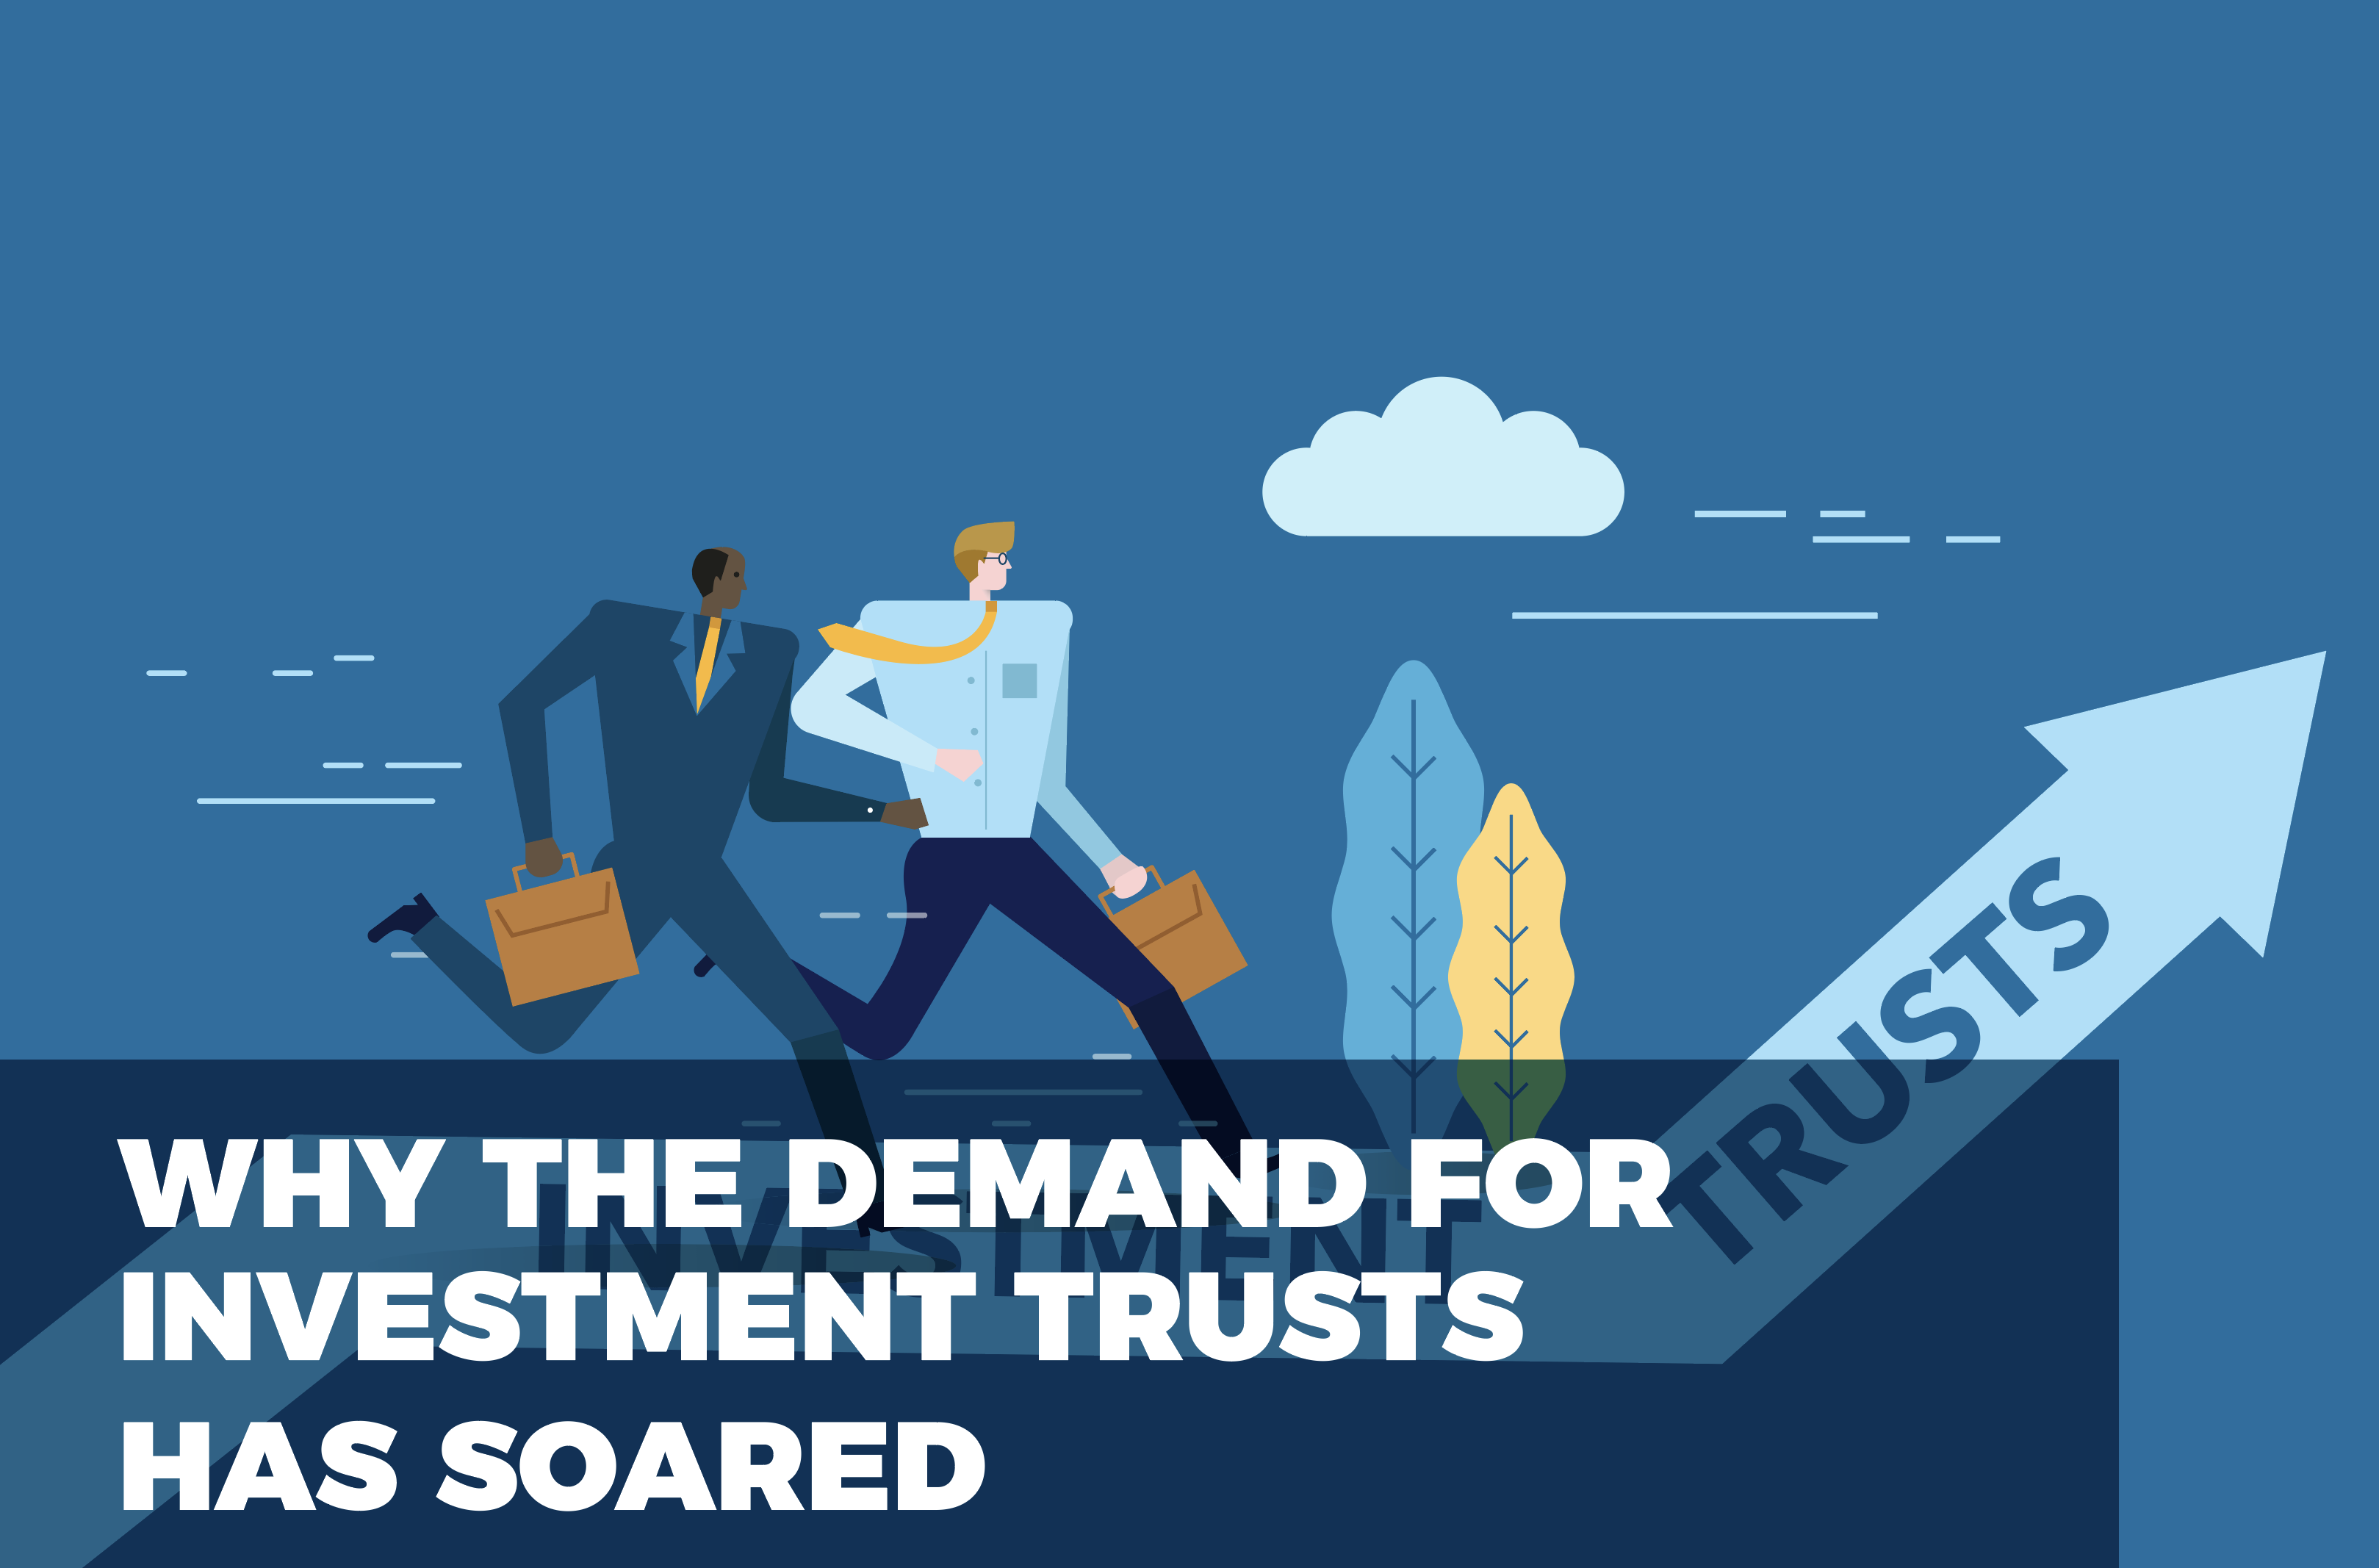 Why Has The Demand for Investment Trusts Soared?